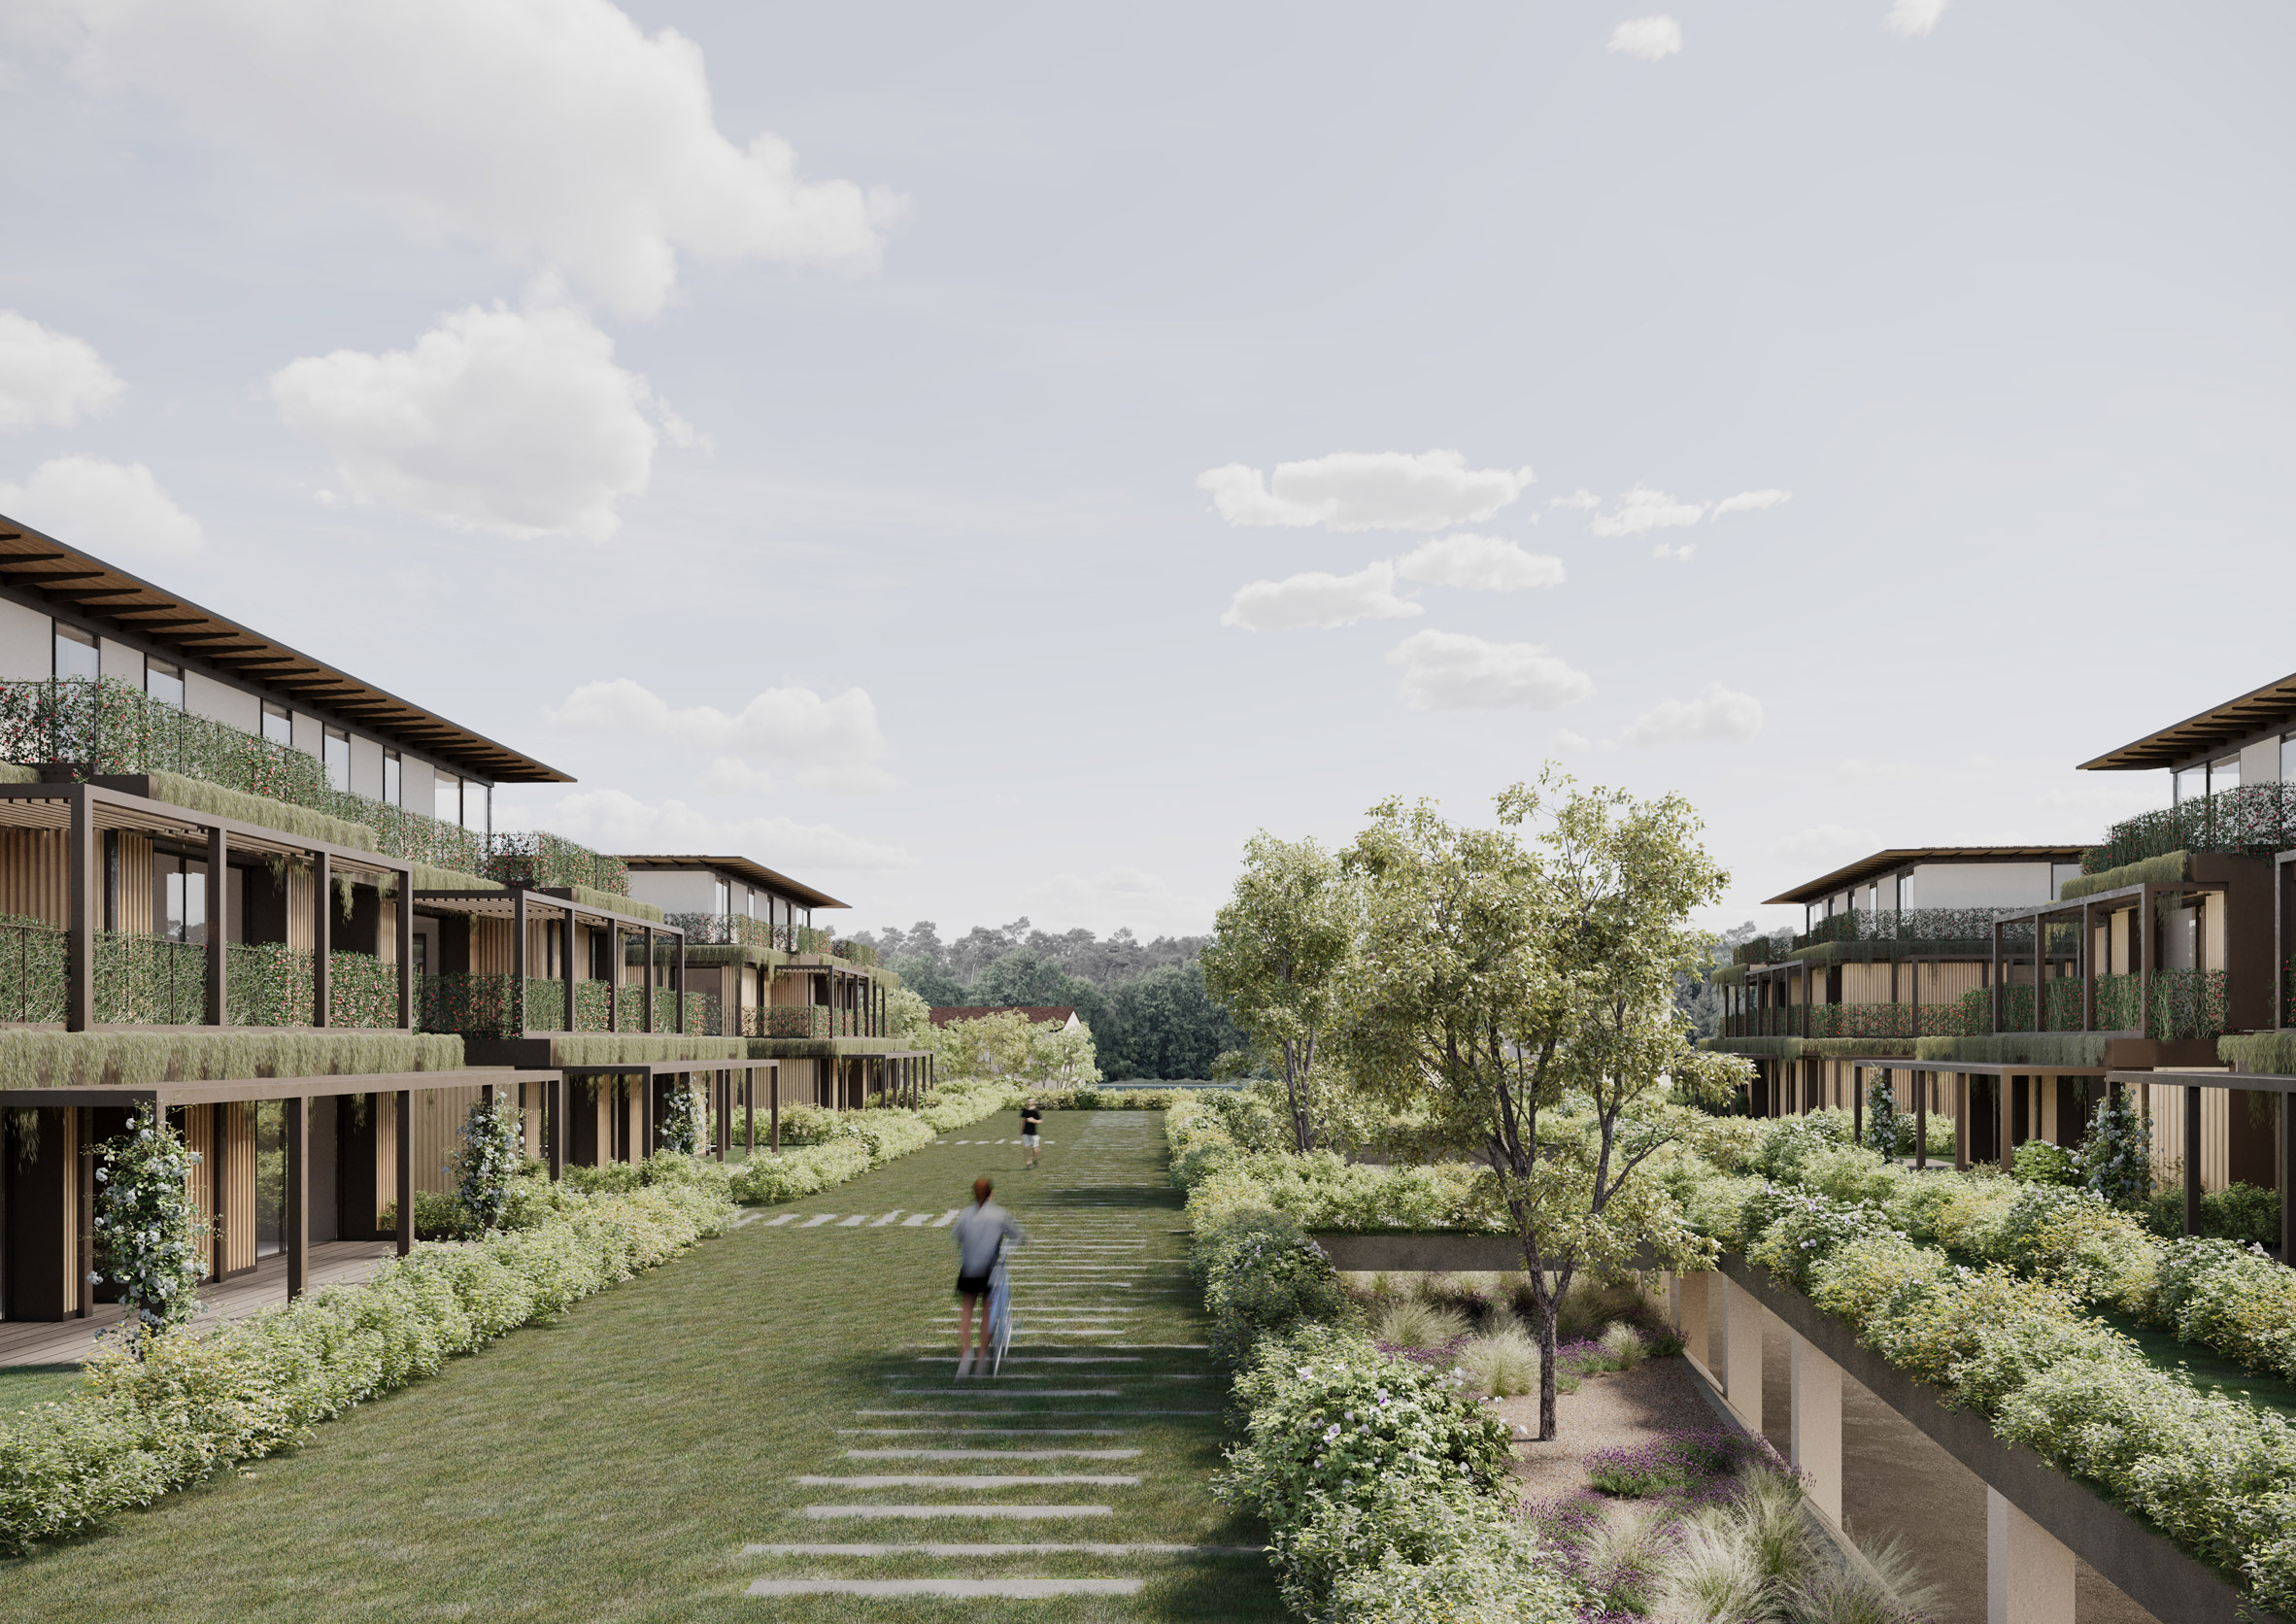 Visualisation showing a green space between two rows of buildings